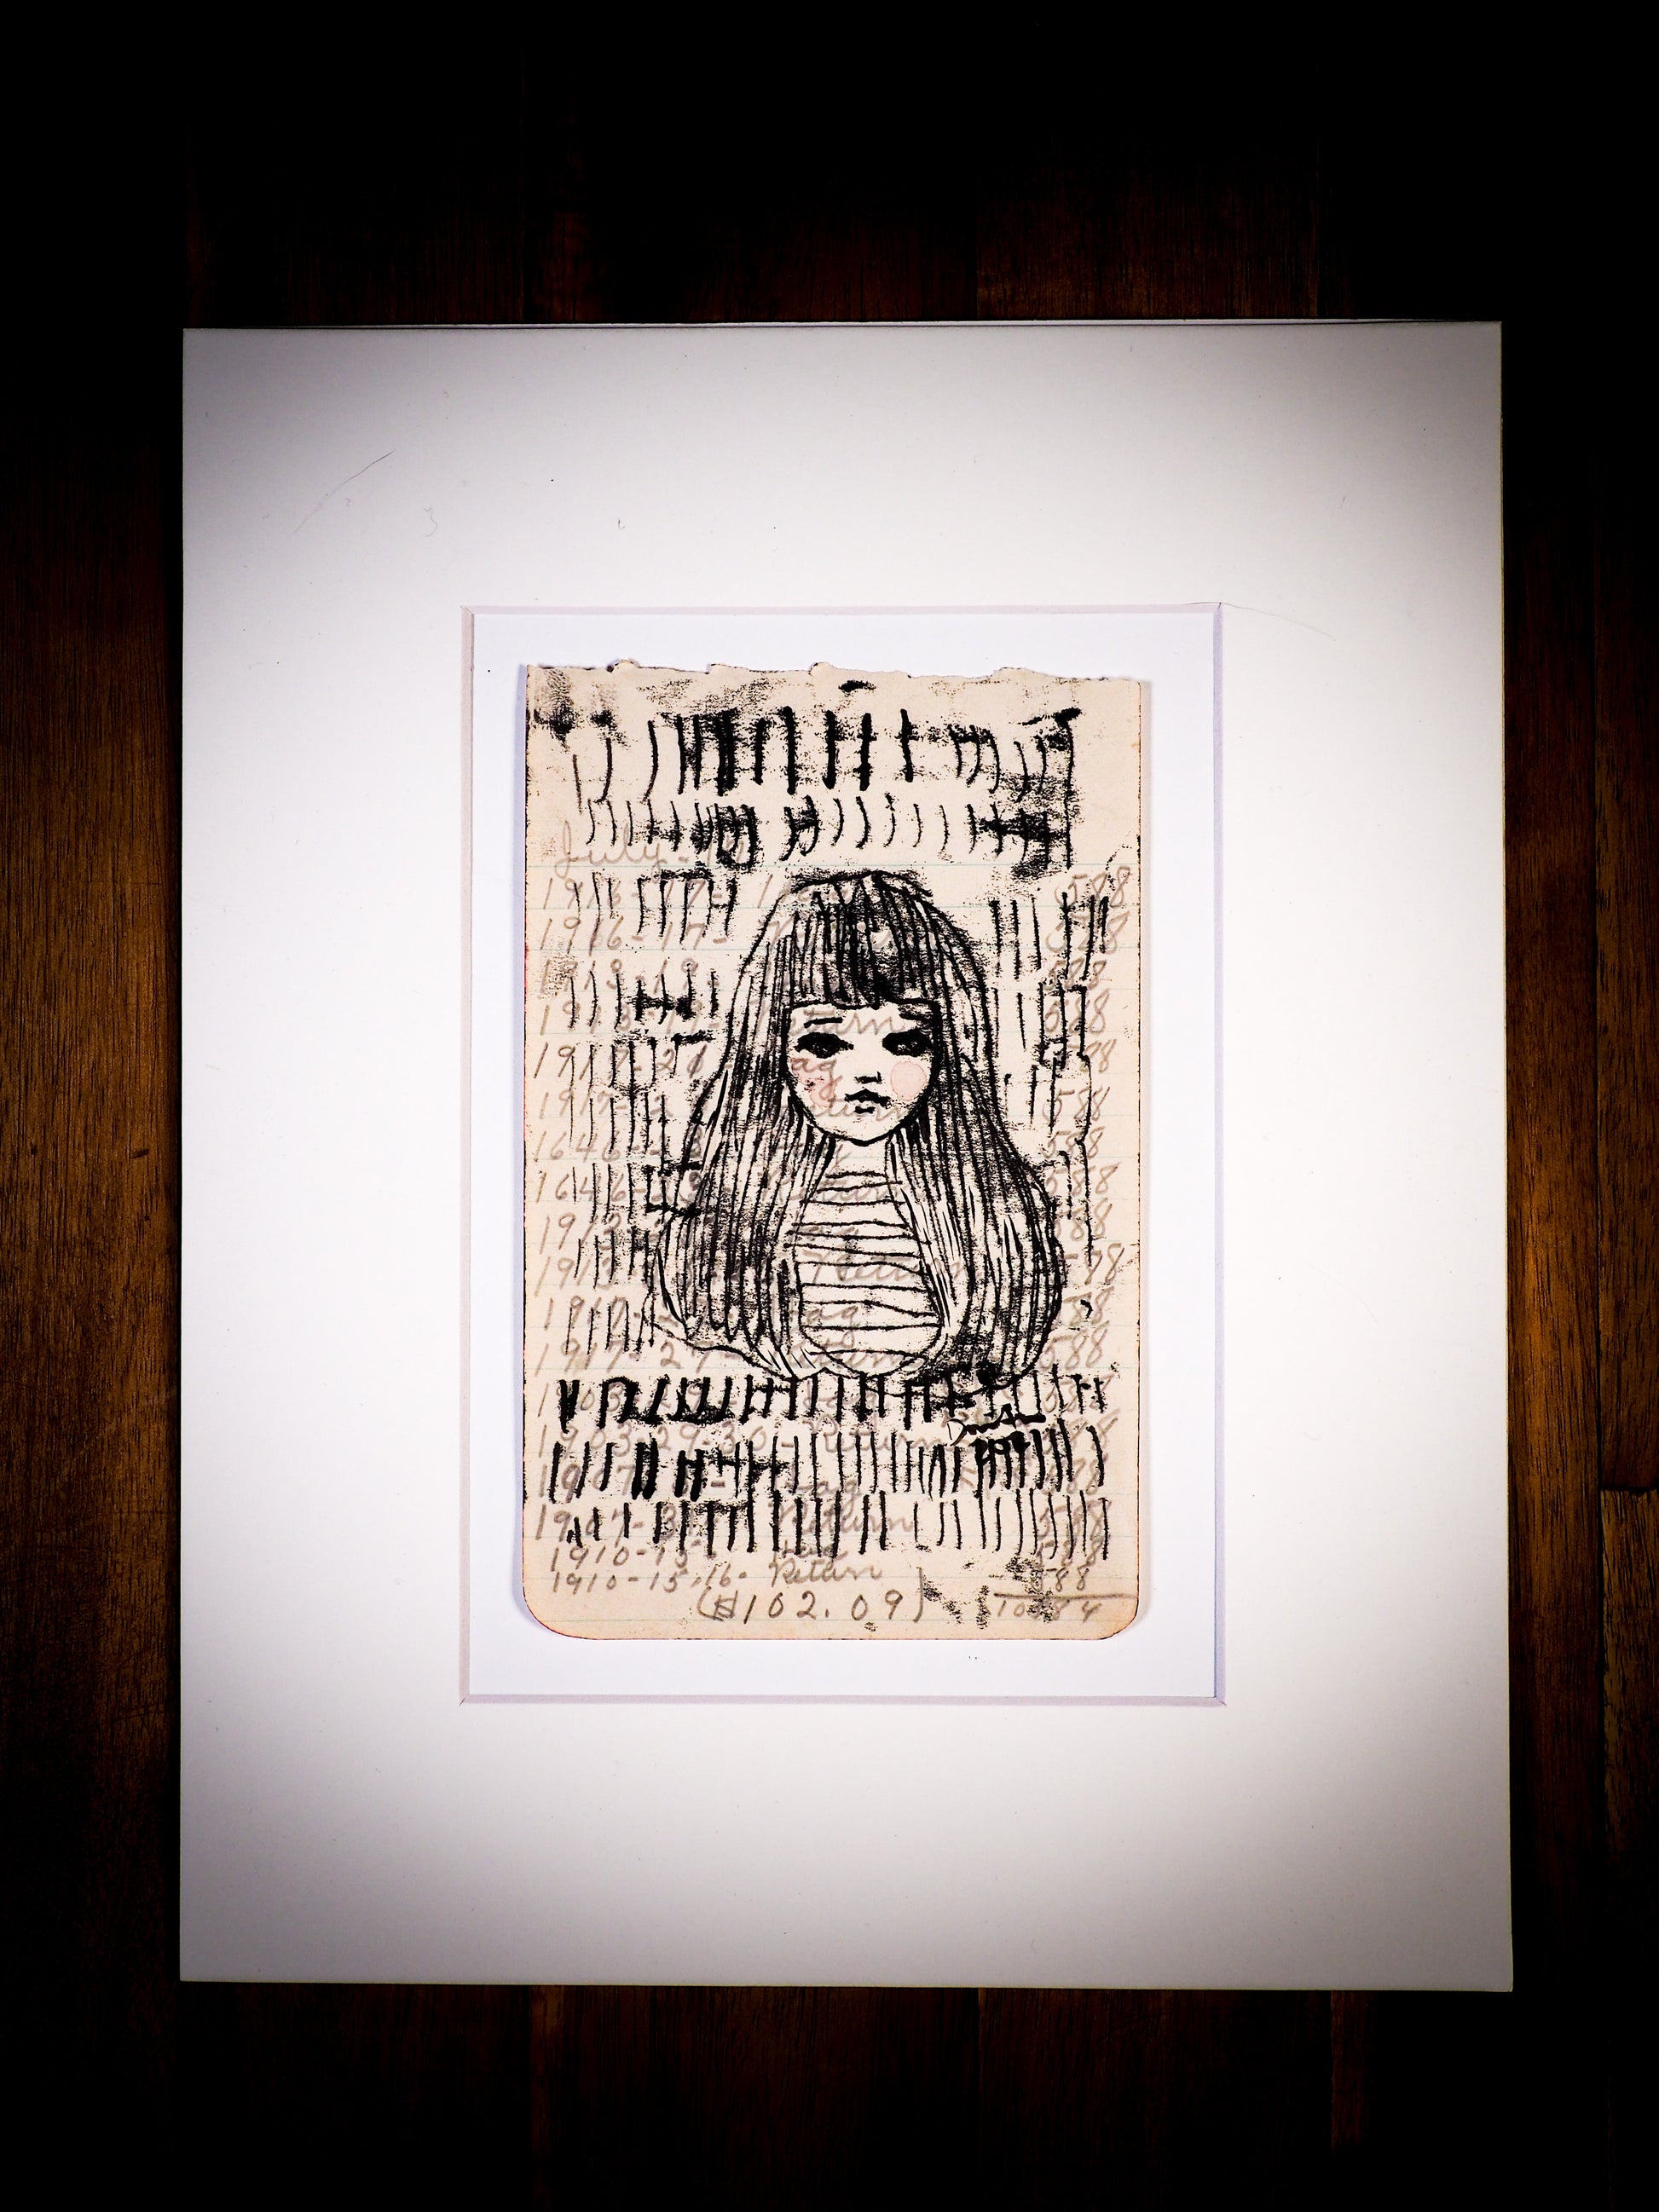 An original watercolor painting by Idania Salcido, the artist behind Danita Art.  This is a beautiful monoprint, a one of a kind ink and vintage paper original art, a self portrait painted on a mid 20th century notes sheet with handwritten characters in ink.